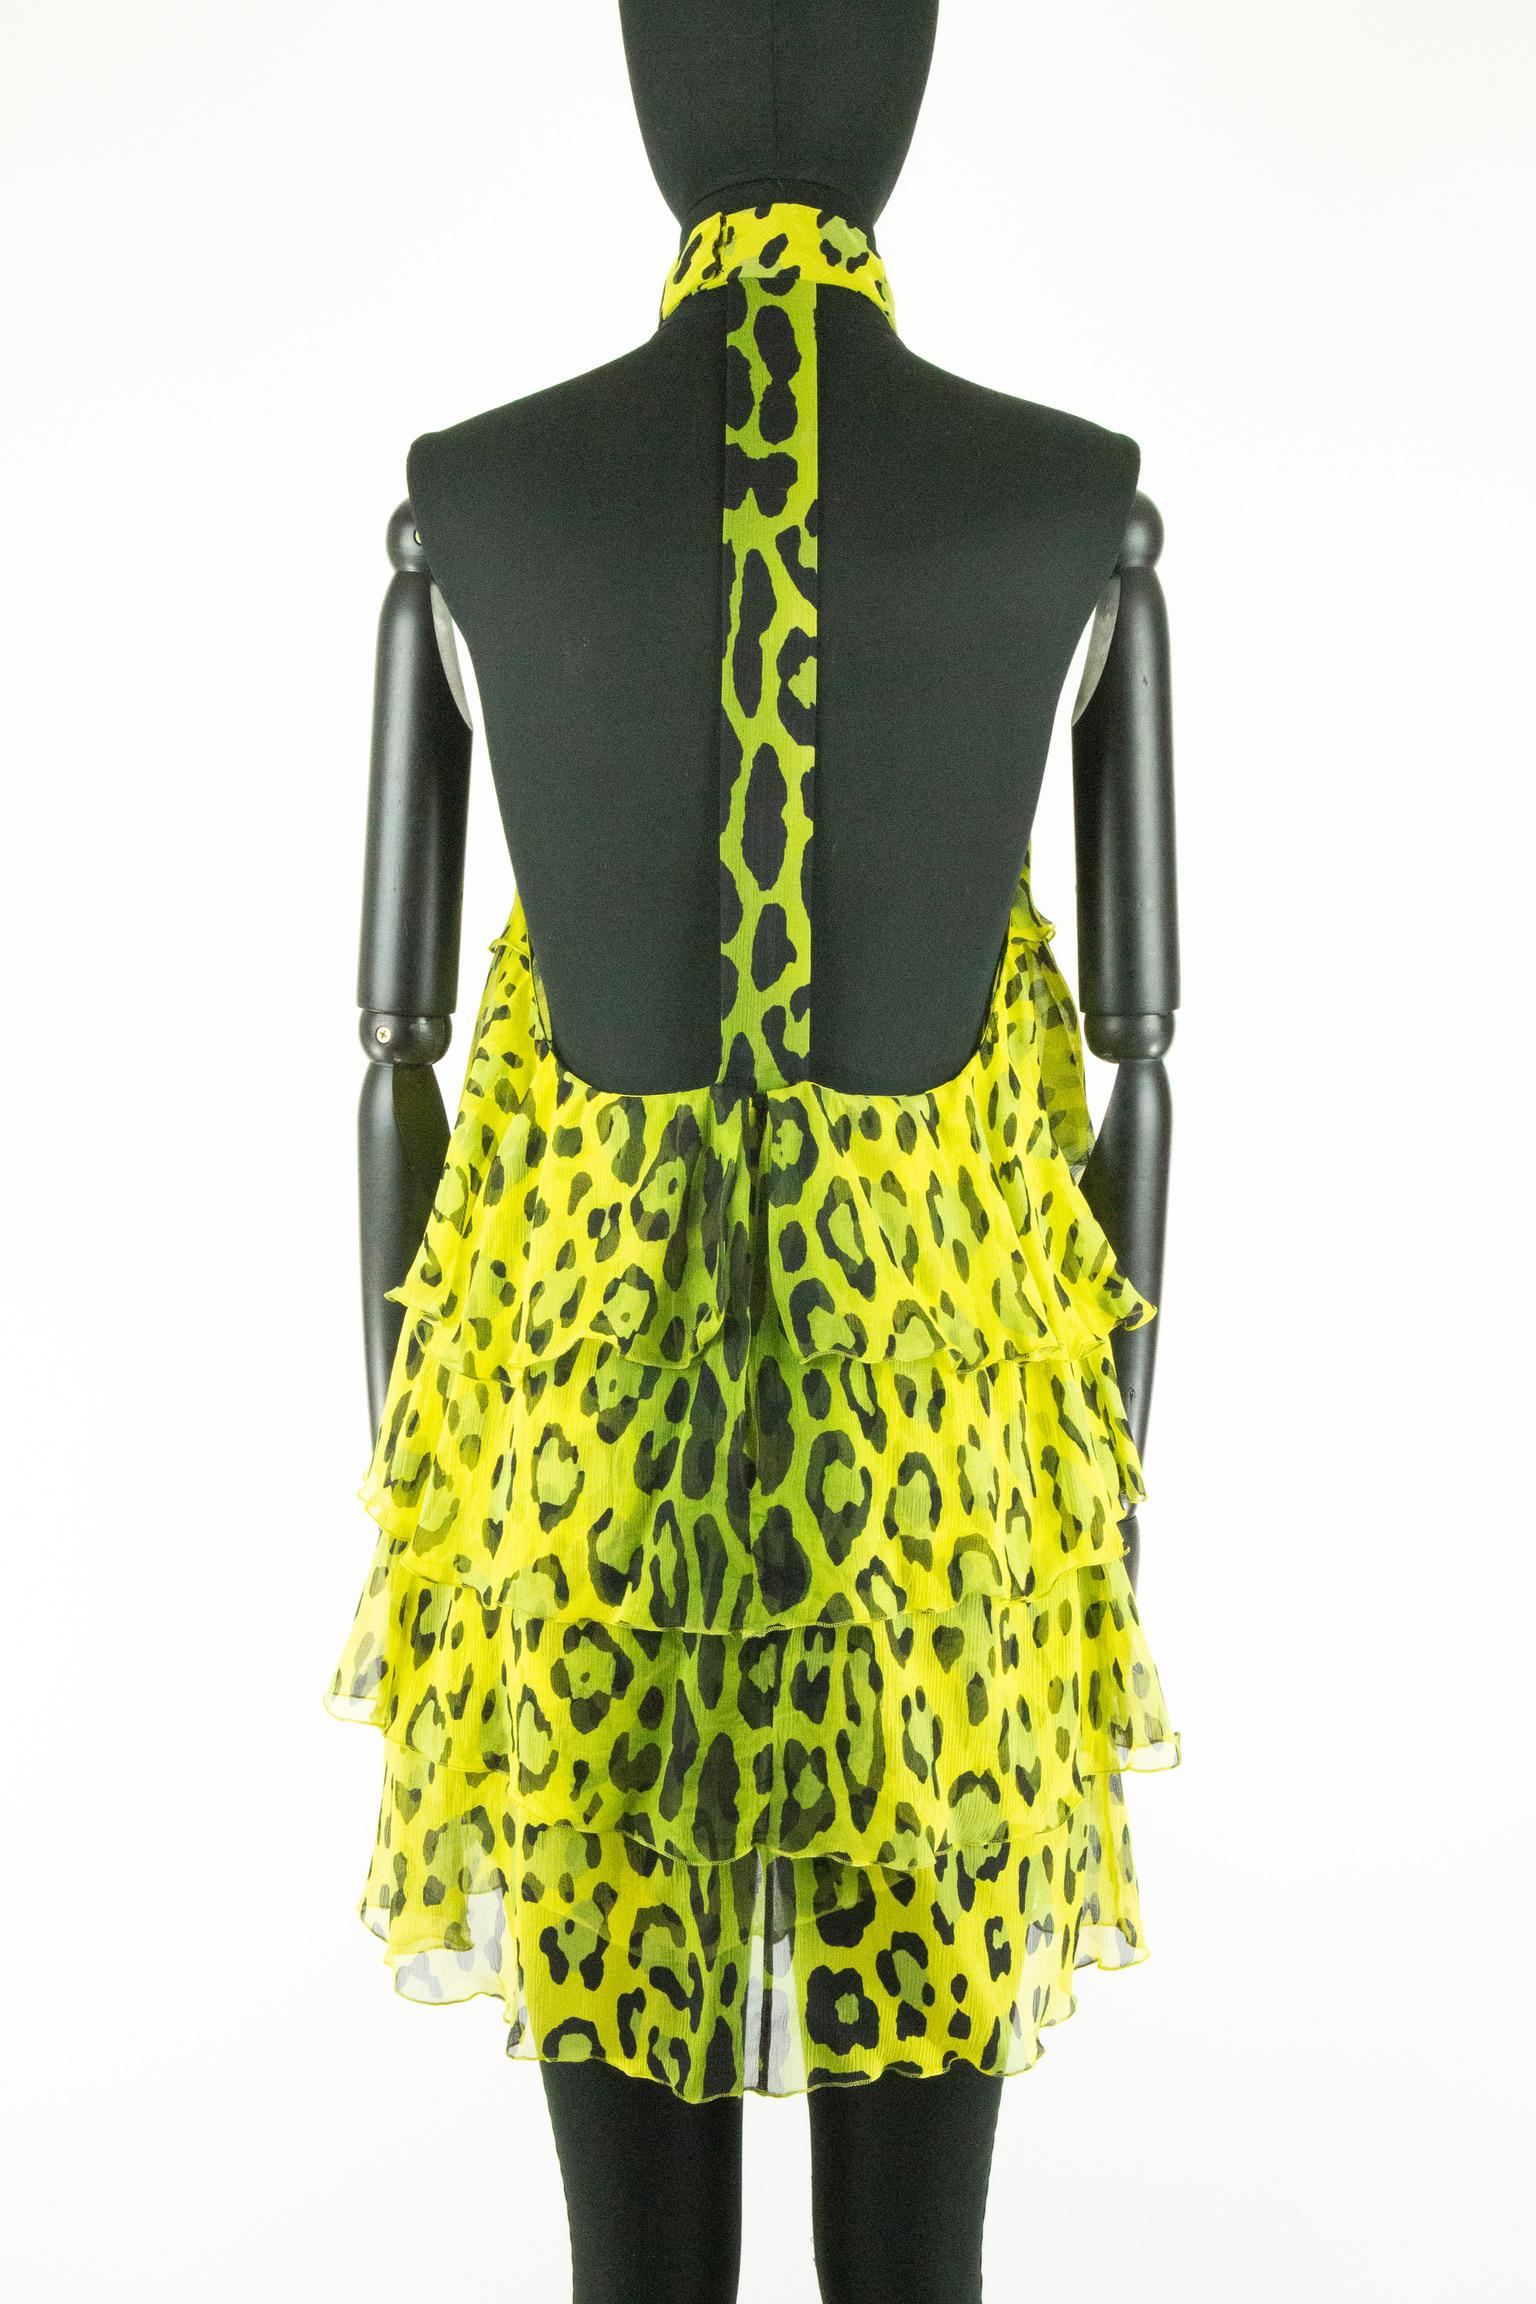 This Tom Ford halter neck dress features a bright and eye-catching print of chartreuse green and yellow leopard print. The body is covered in layered ruffles right up to the tight collar. The rear features a strap running down the open back and is